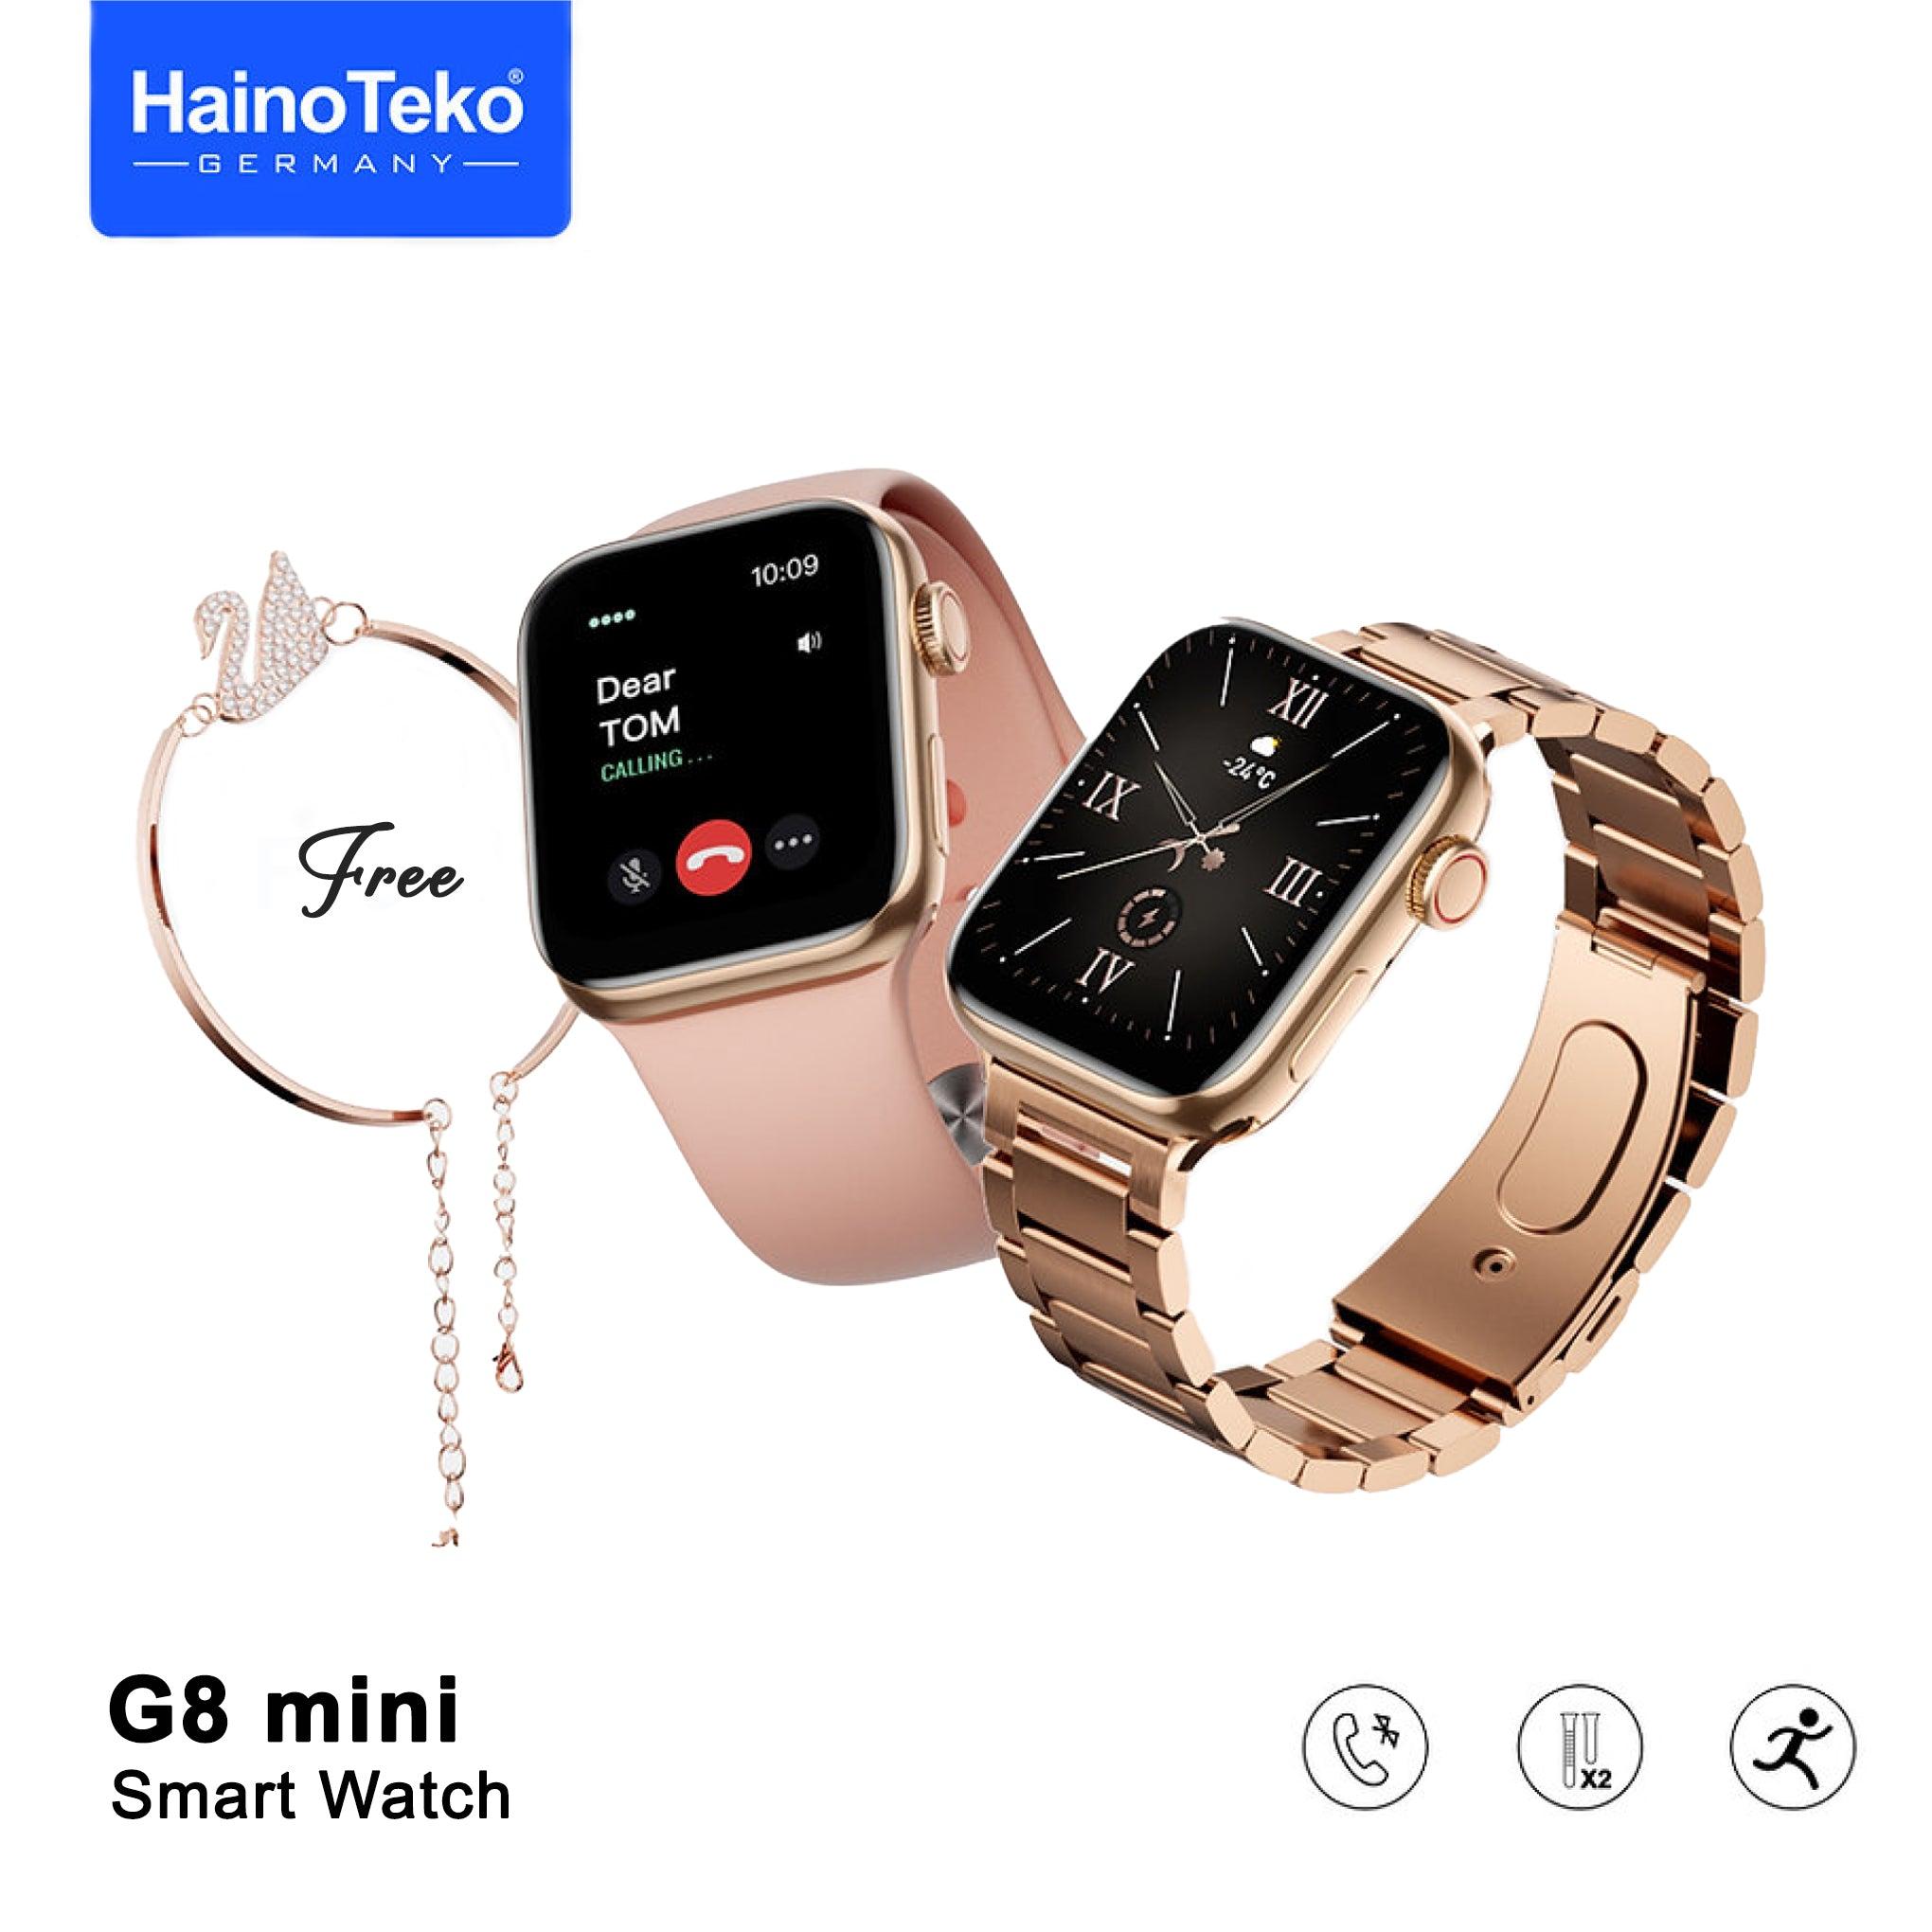 Haino Teko Germany G8 Mini Smart Watch 41mm With Two Set Strap Hd Smart Display Rose Gold Edition With Wireless Charger And Beautiful Bracelet For Ladies